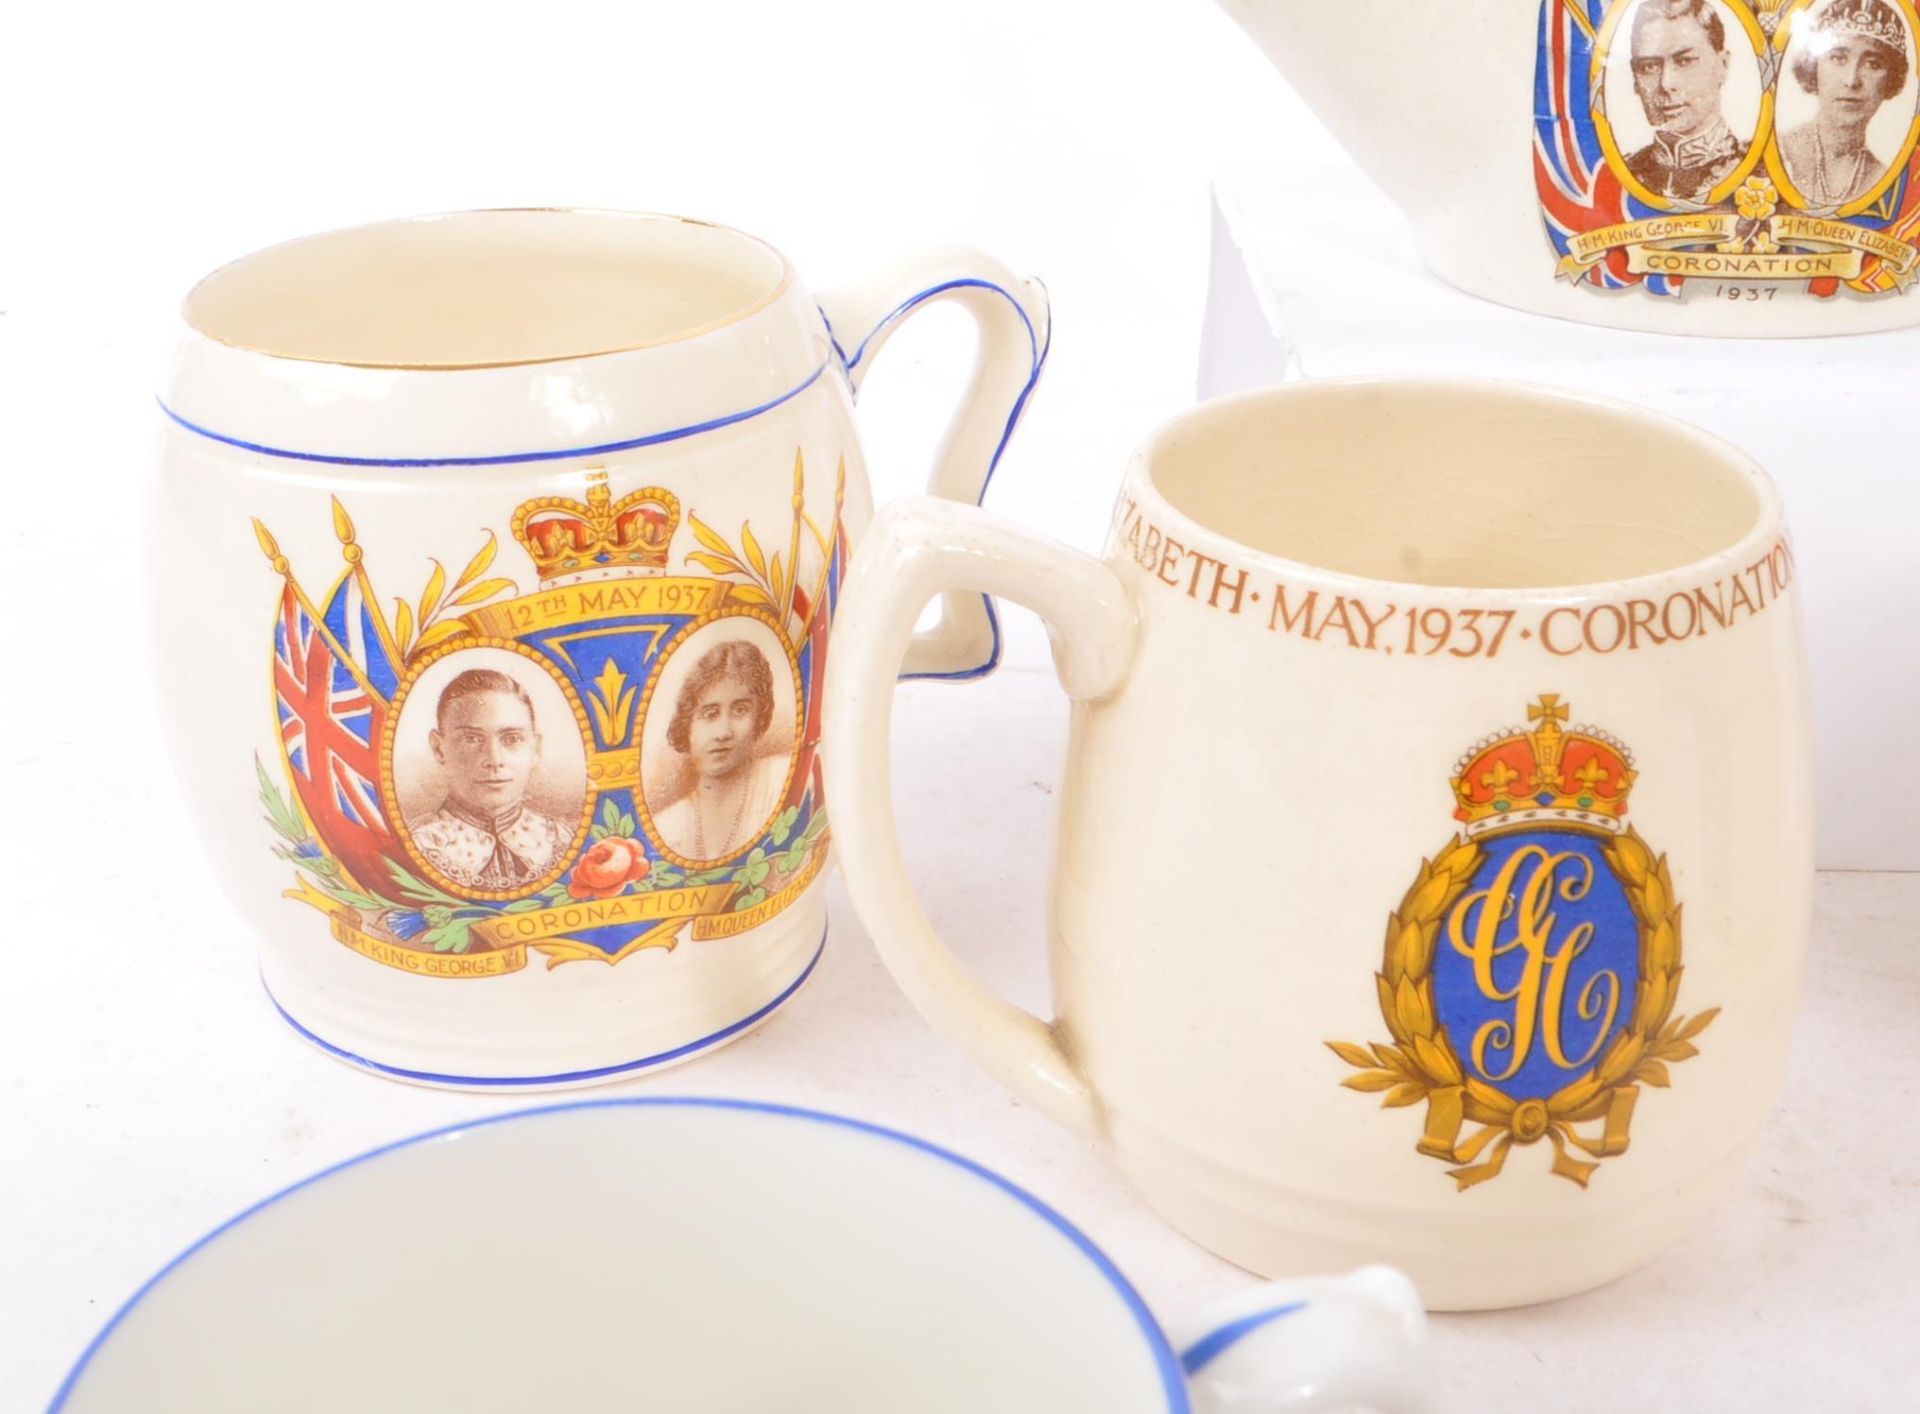 COLLECTION OF CHINA ITEMS - GEORGE VI CORONATION - Image 3 of 6